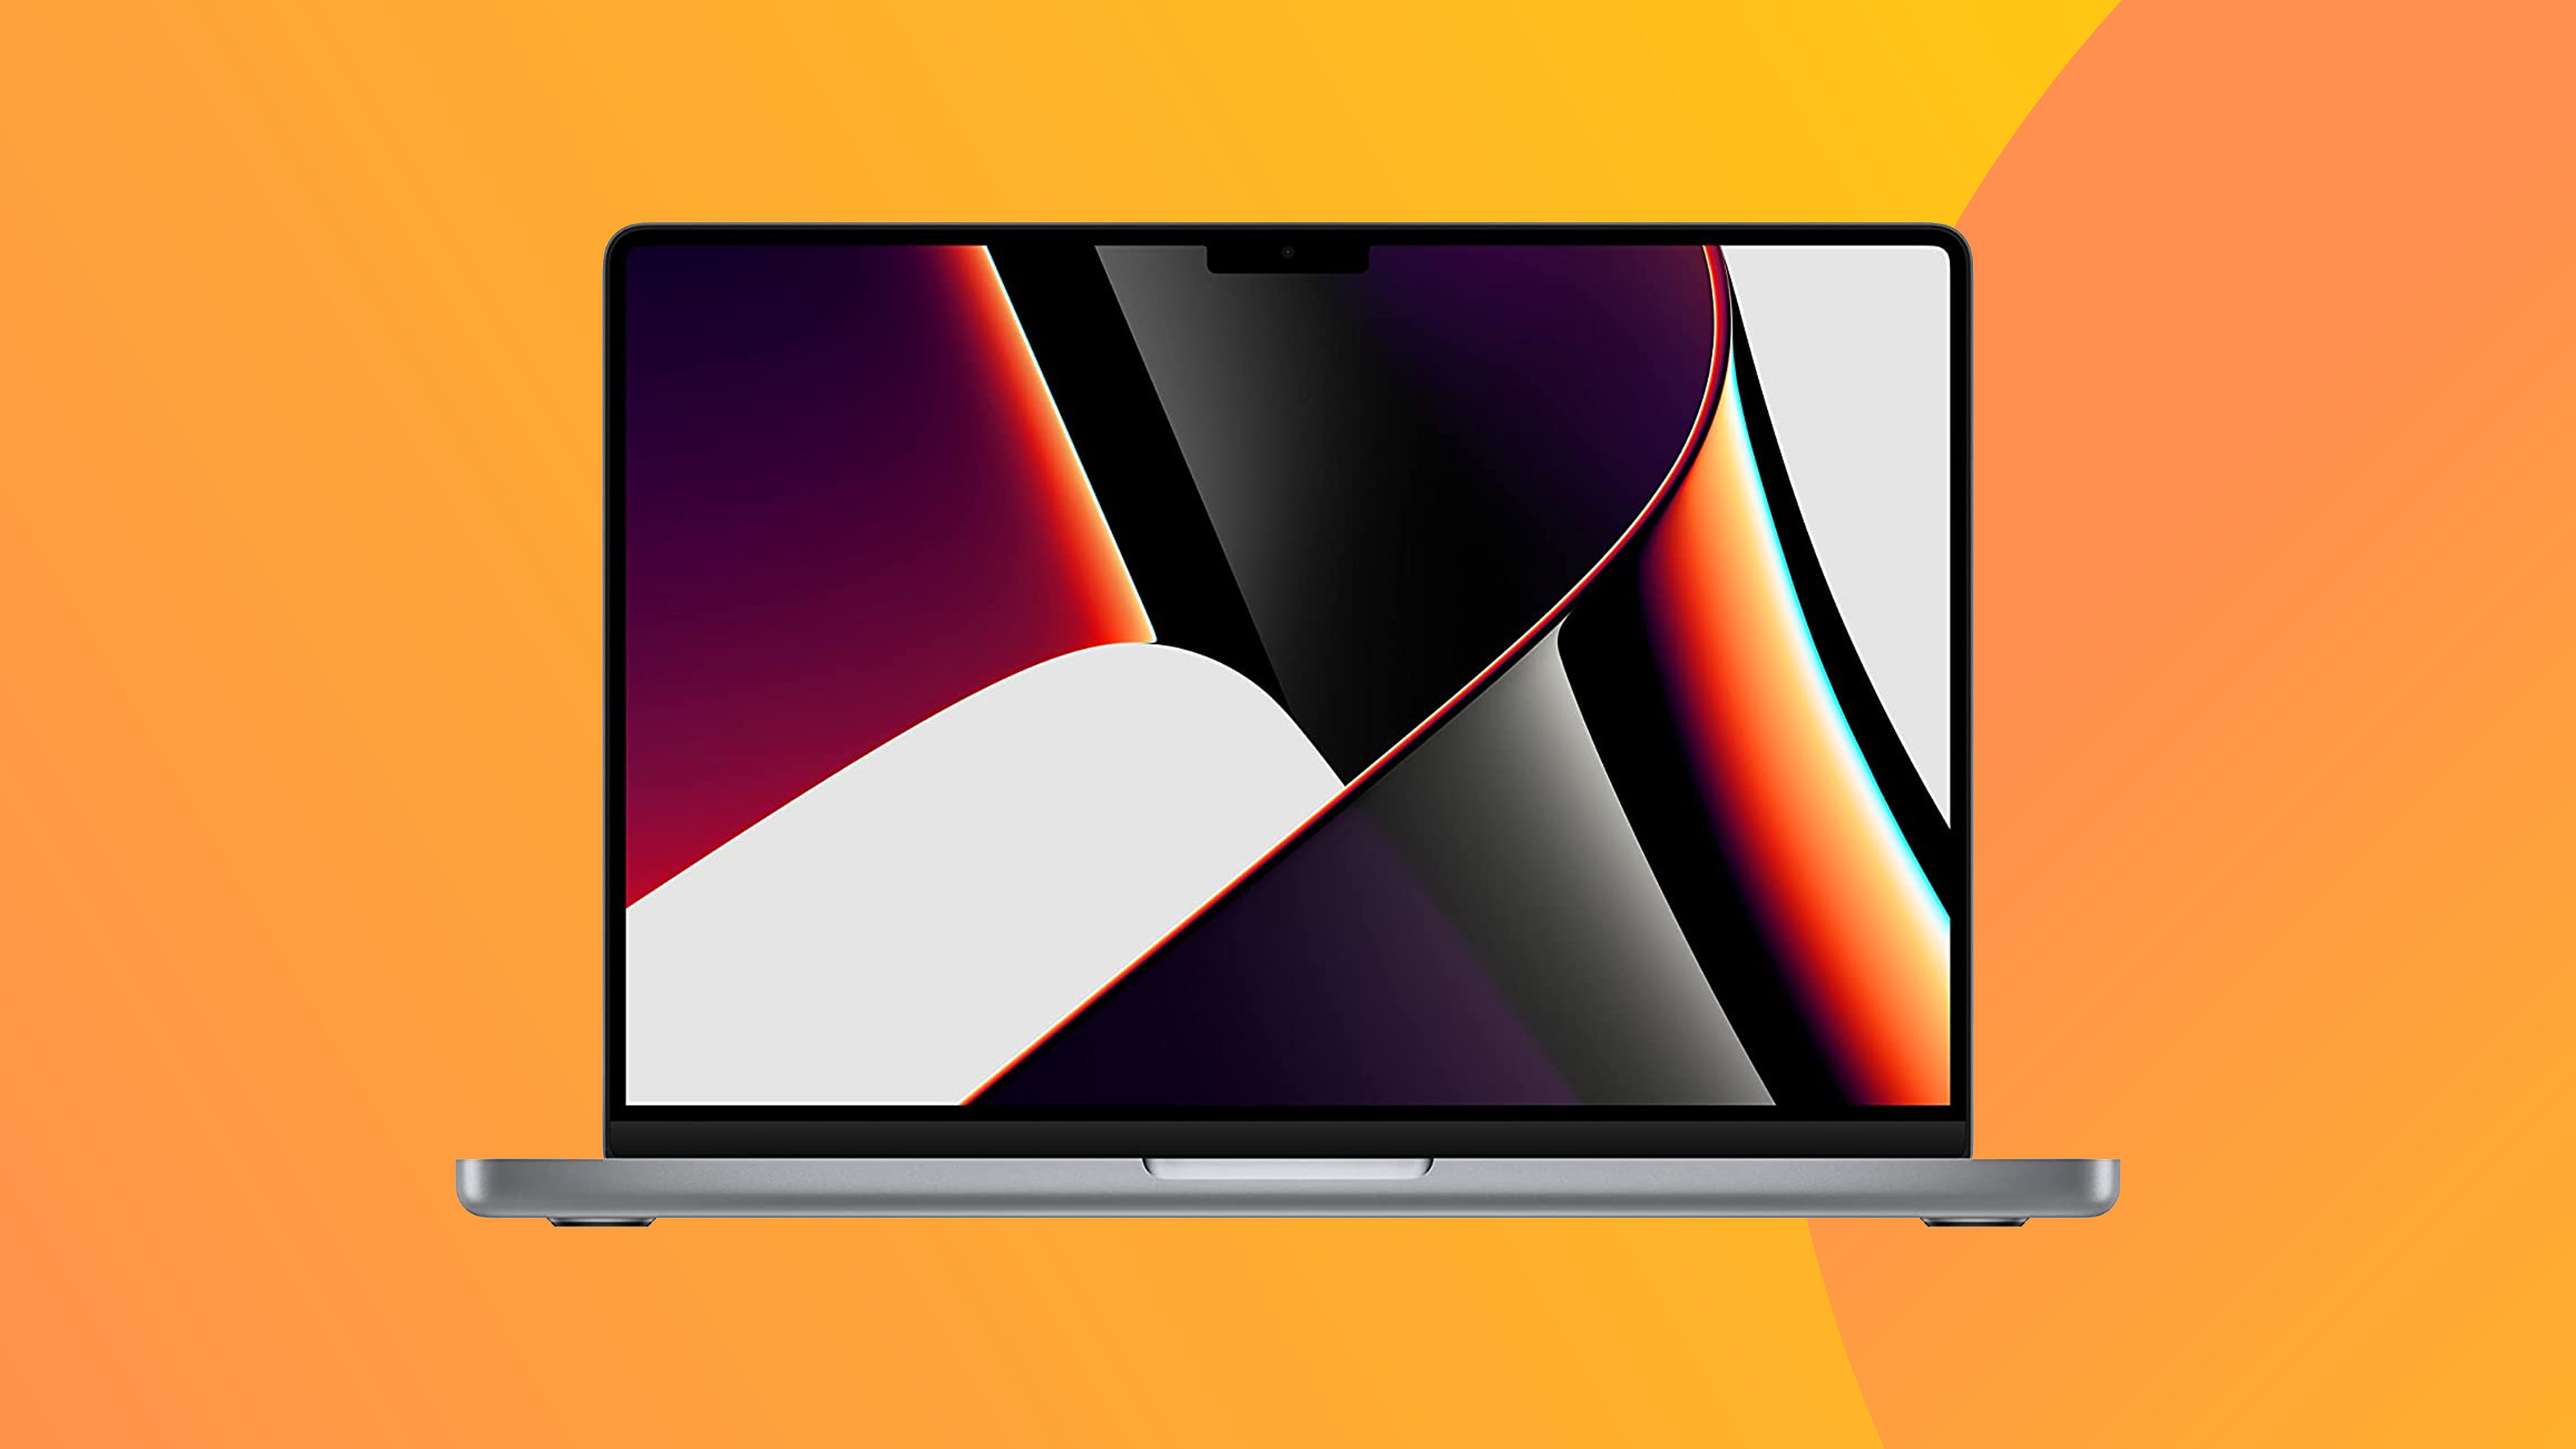 A product image of the Macbook Pro 2021 on a colorful background